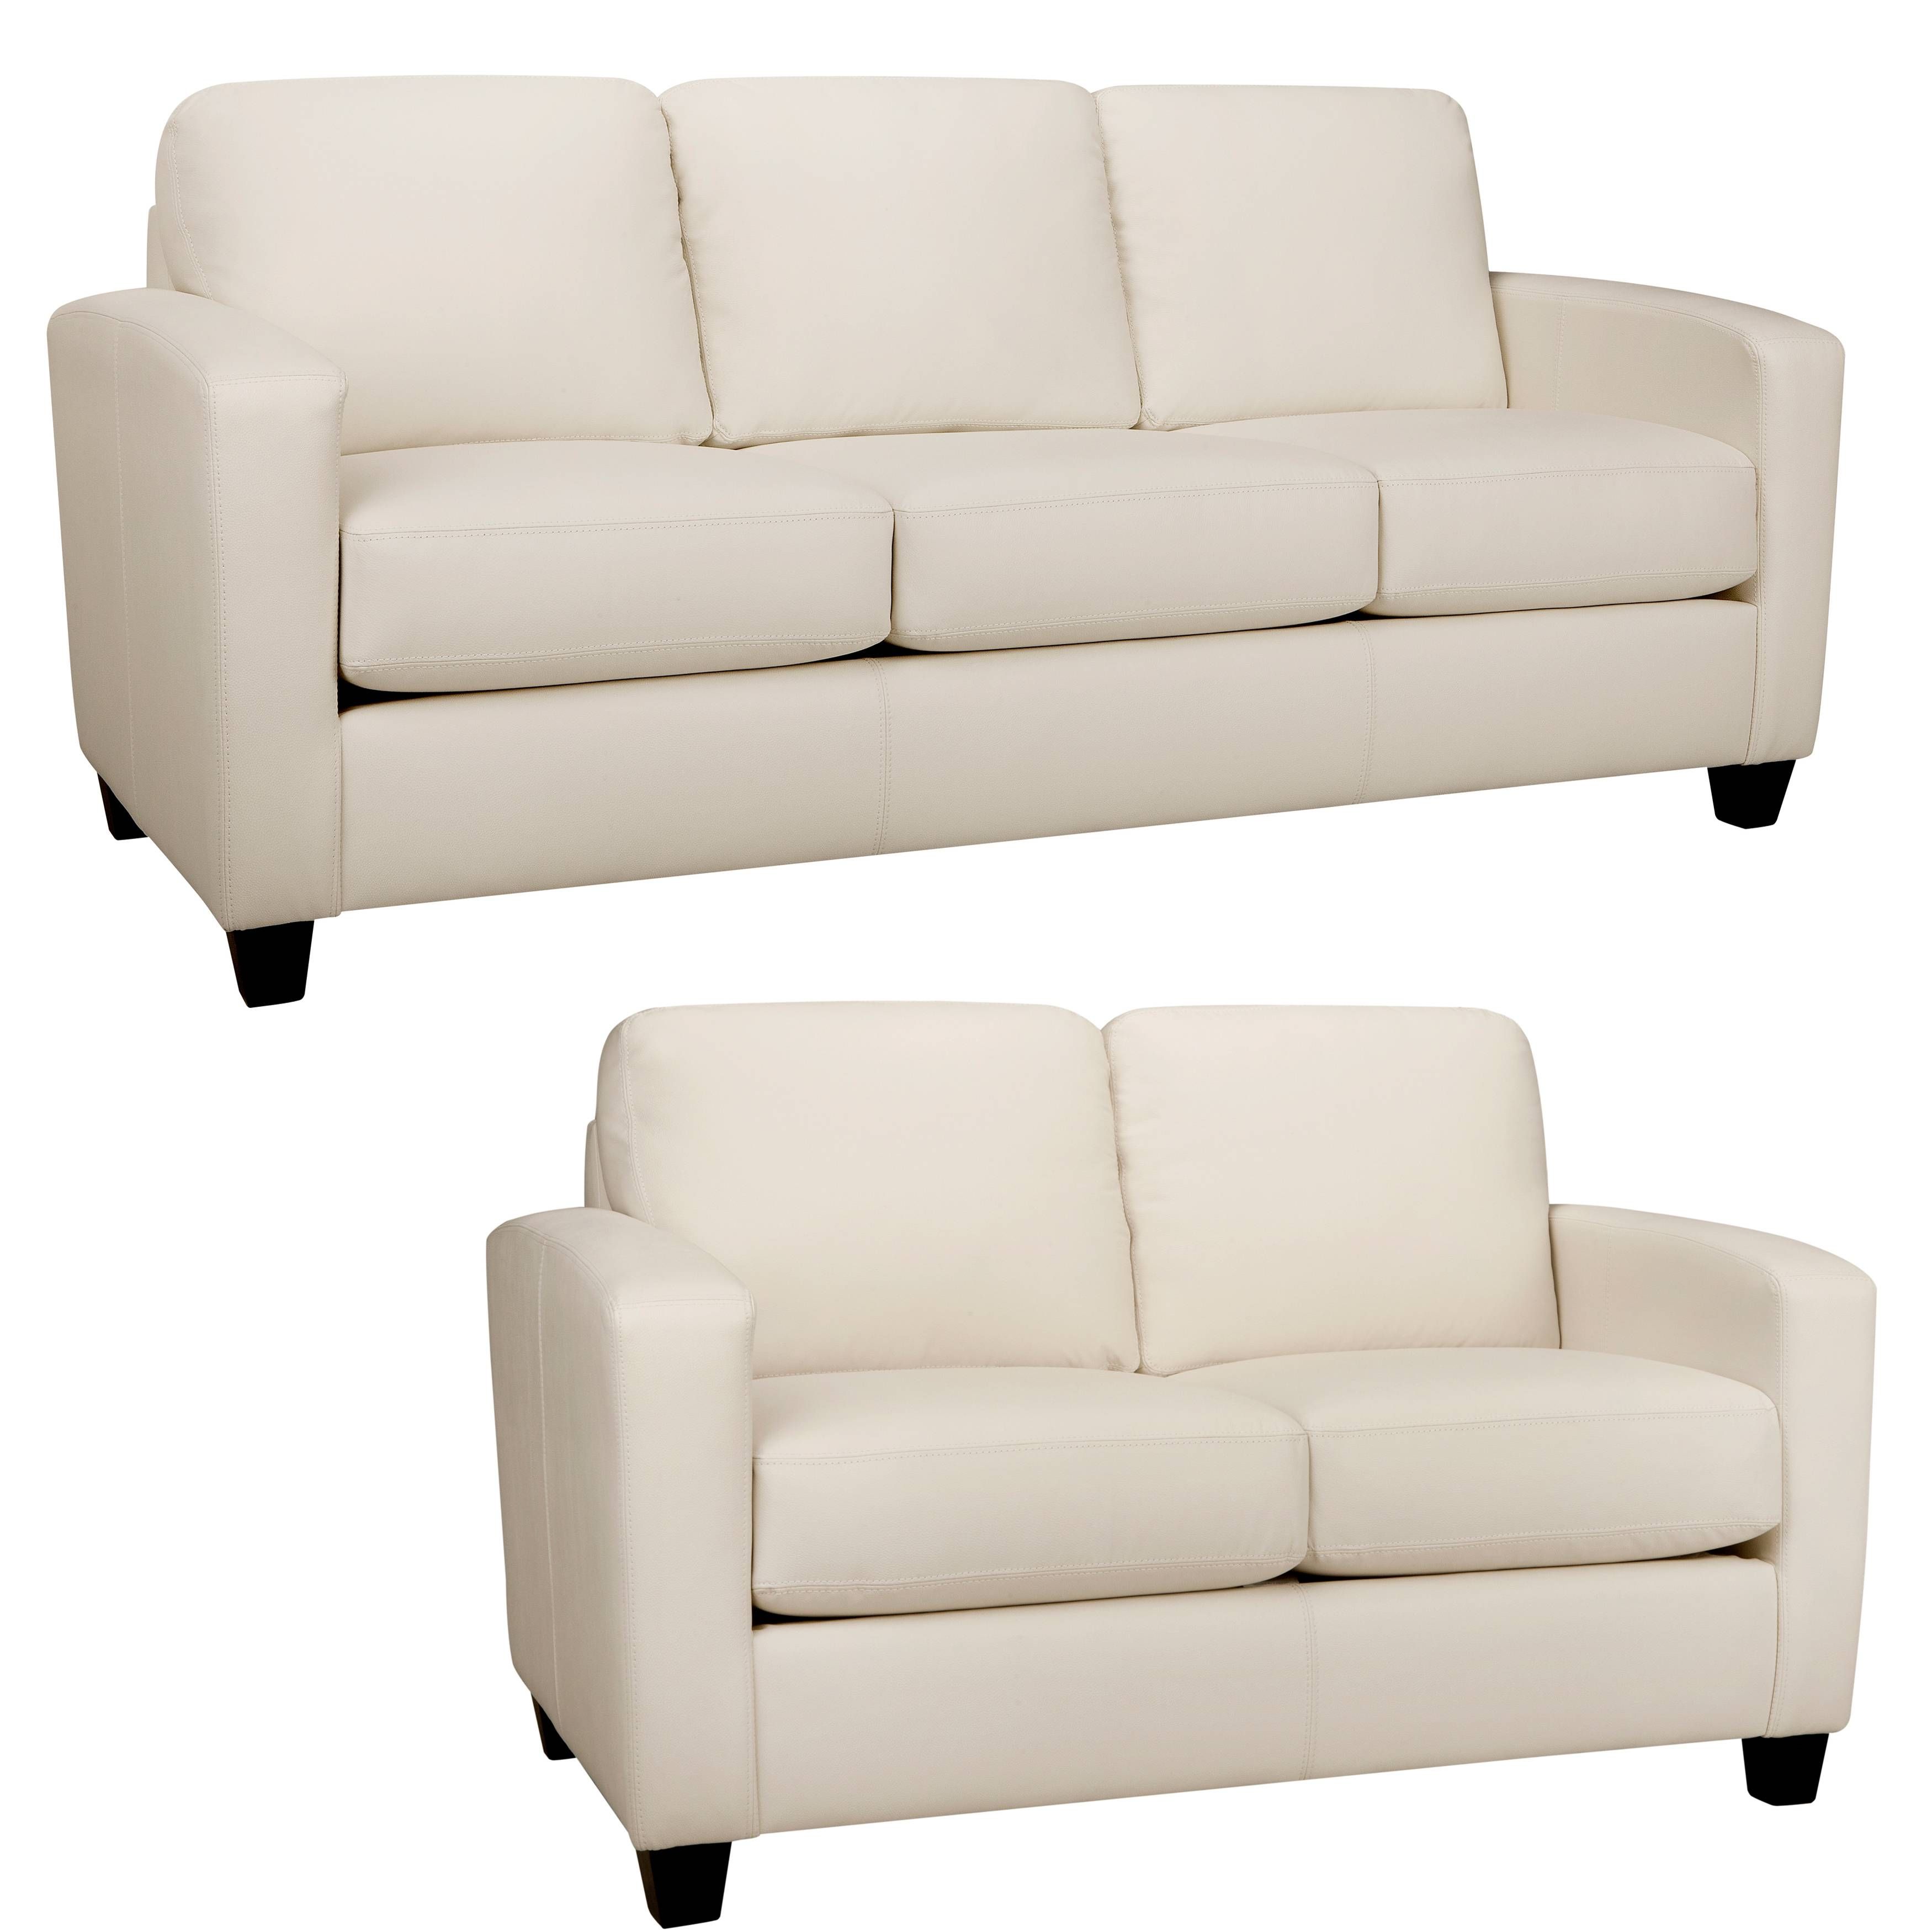 Off White Leather Sofa And Loveseat | Sofa Menzilperde With Regard To Off White Leather Sofa And Loveseat (View 23 of 30)